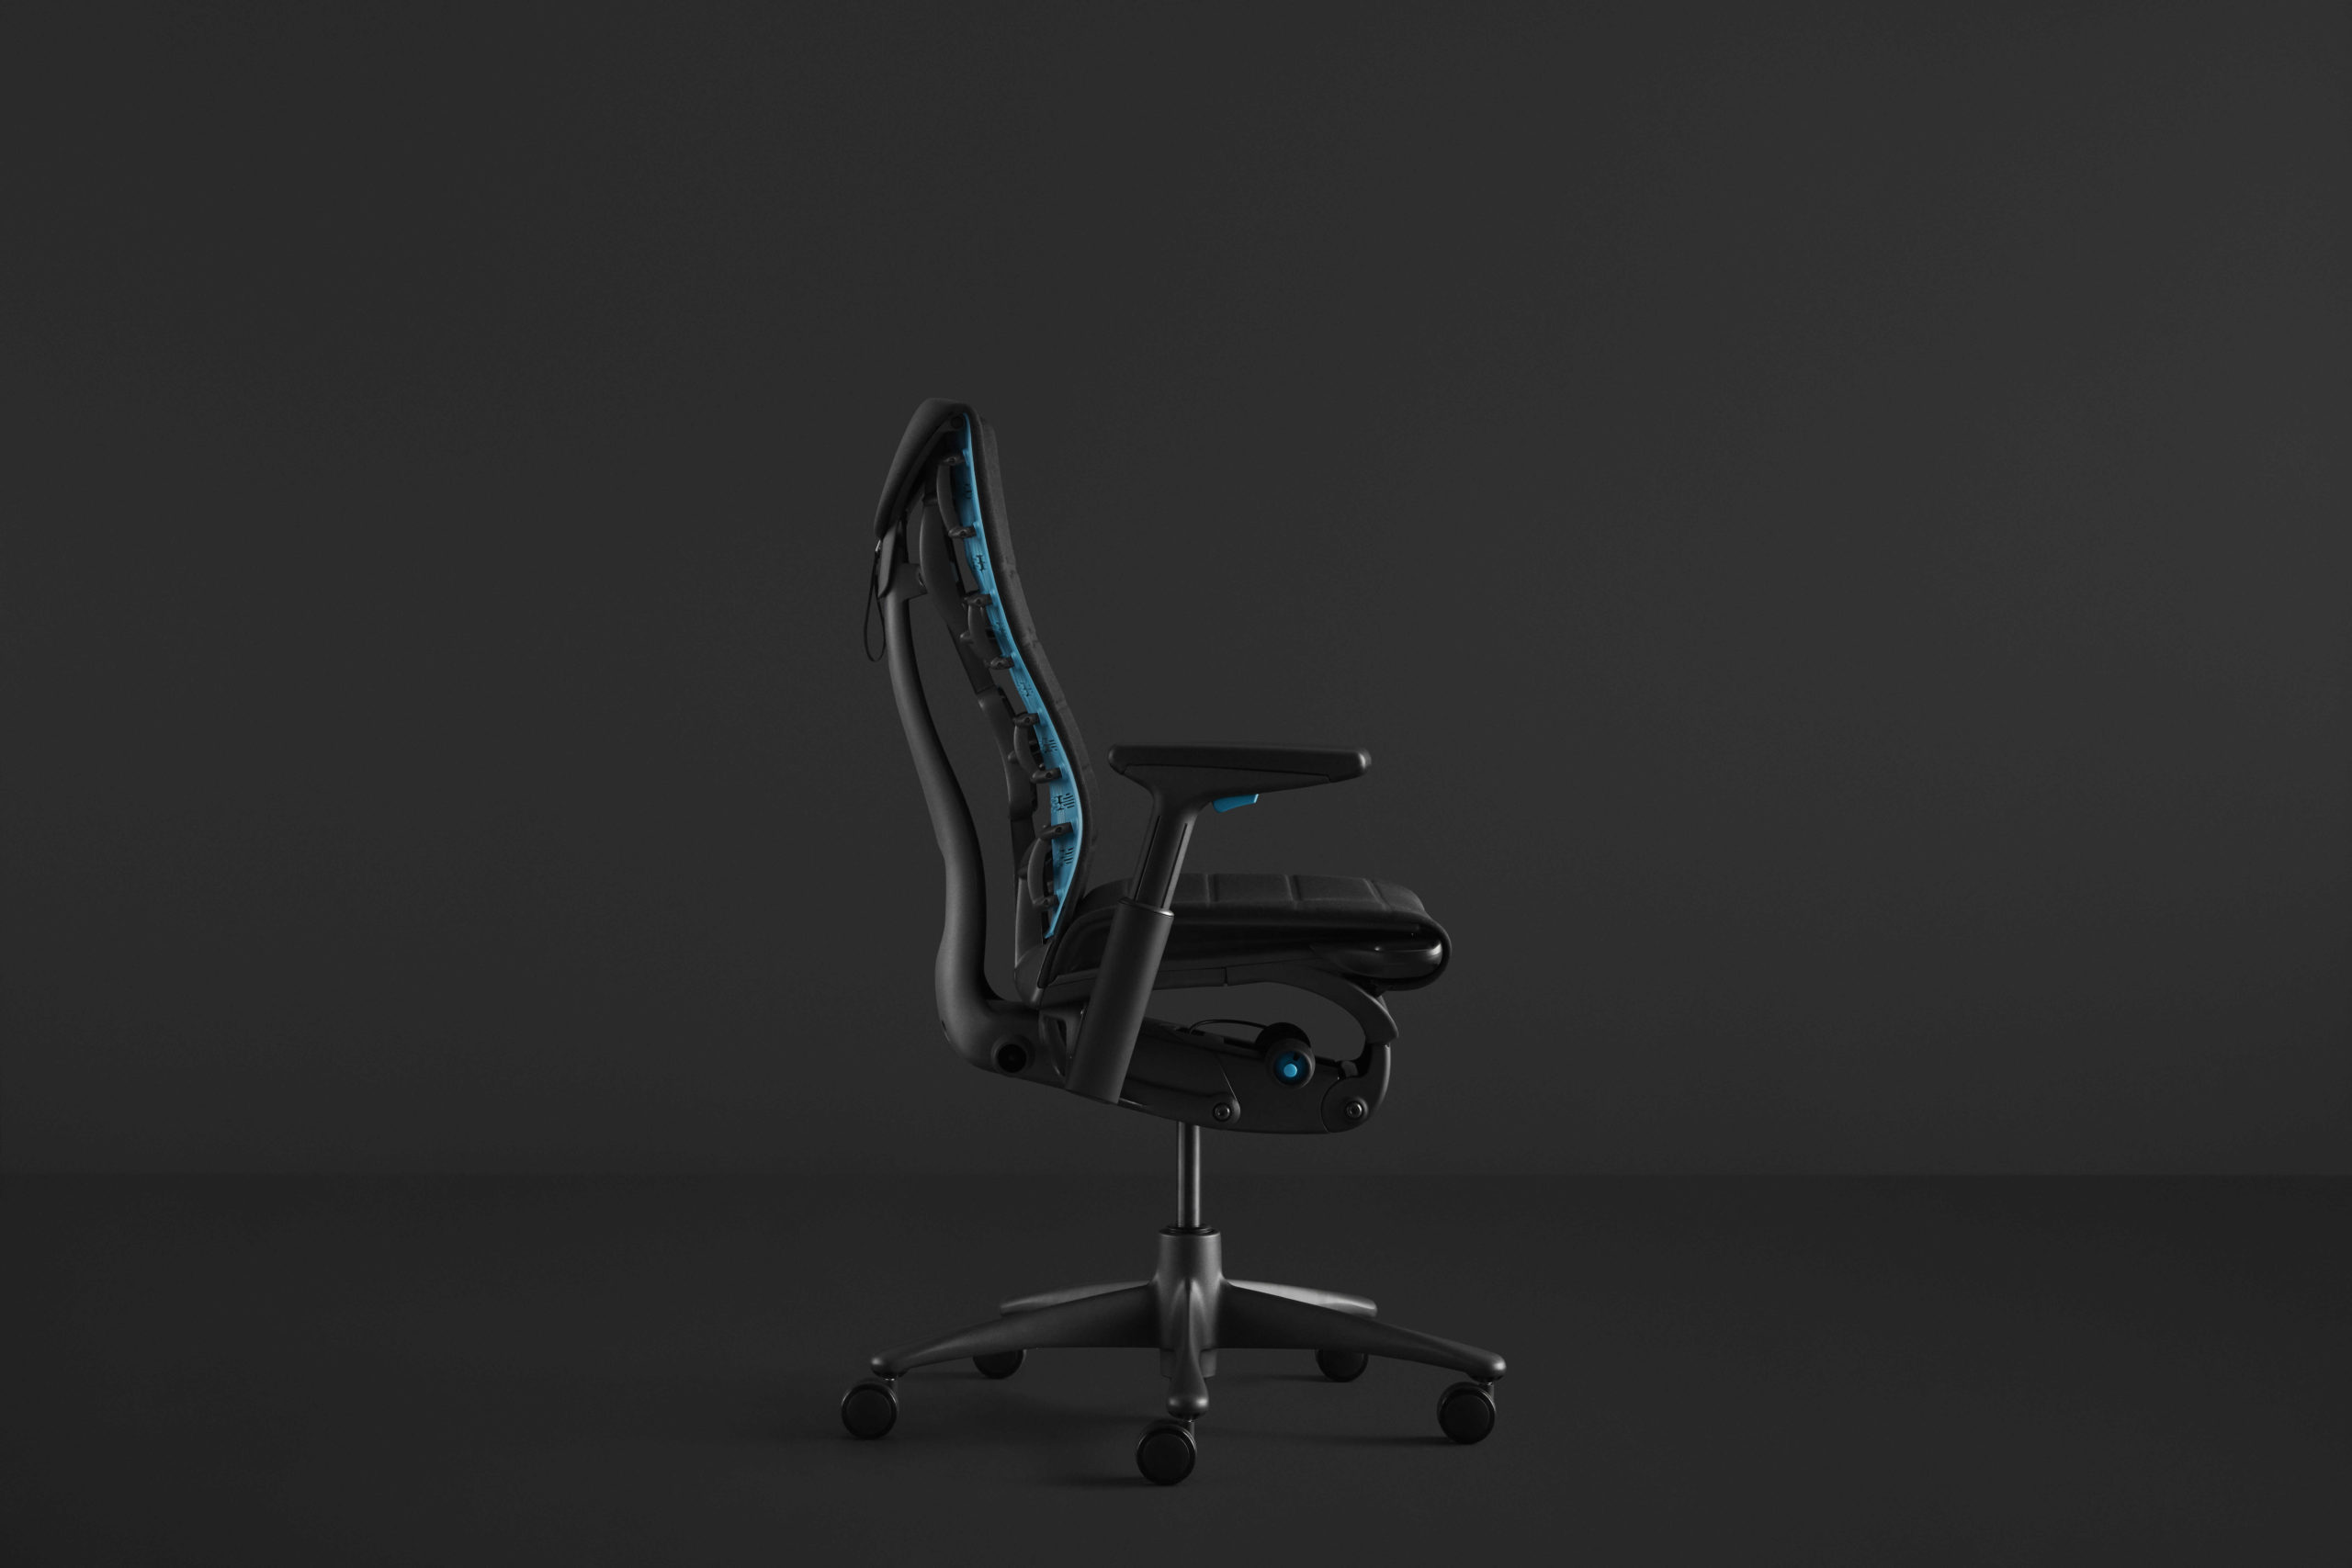 LOGITECH G AND HERMAN MILLER ENHANCE THE EMBODY CHAIR TO